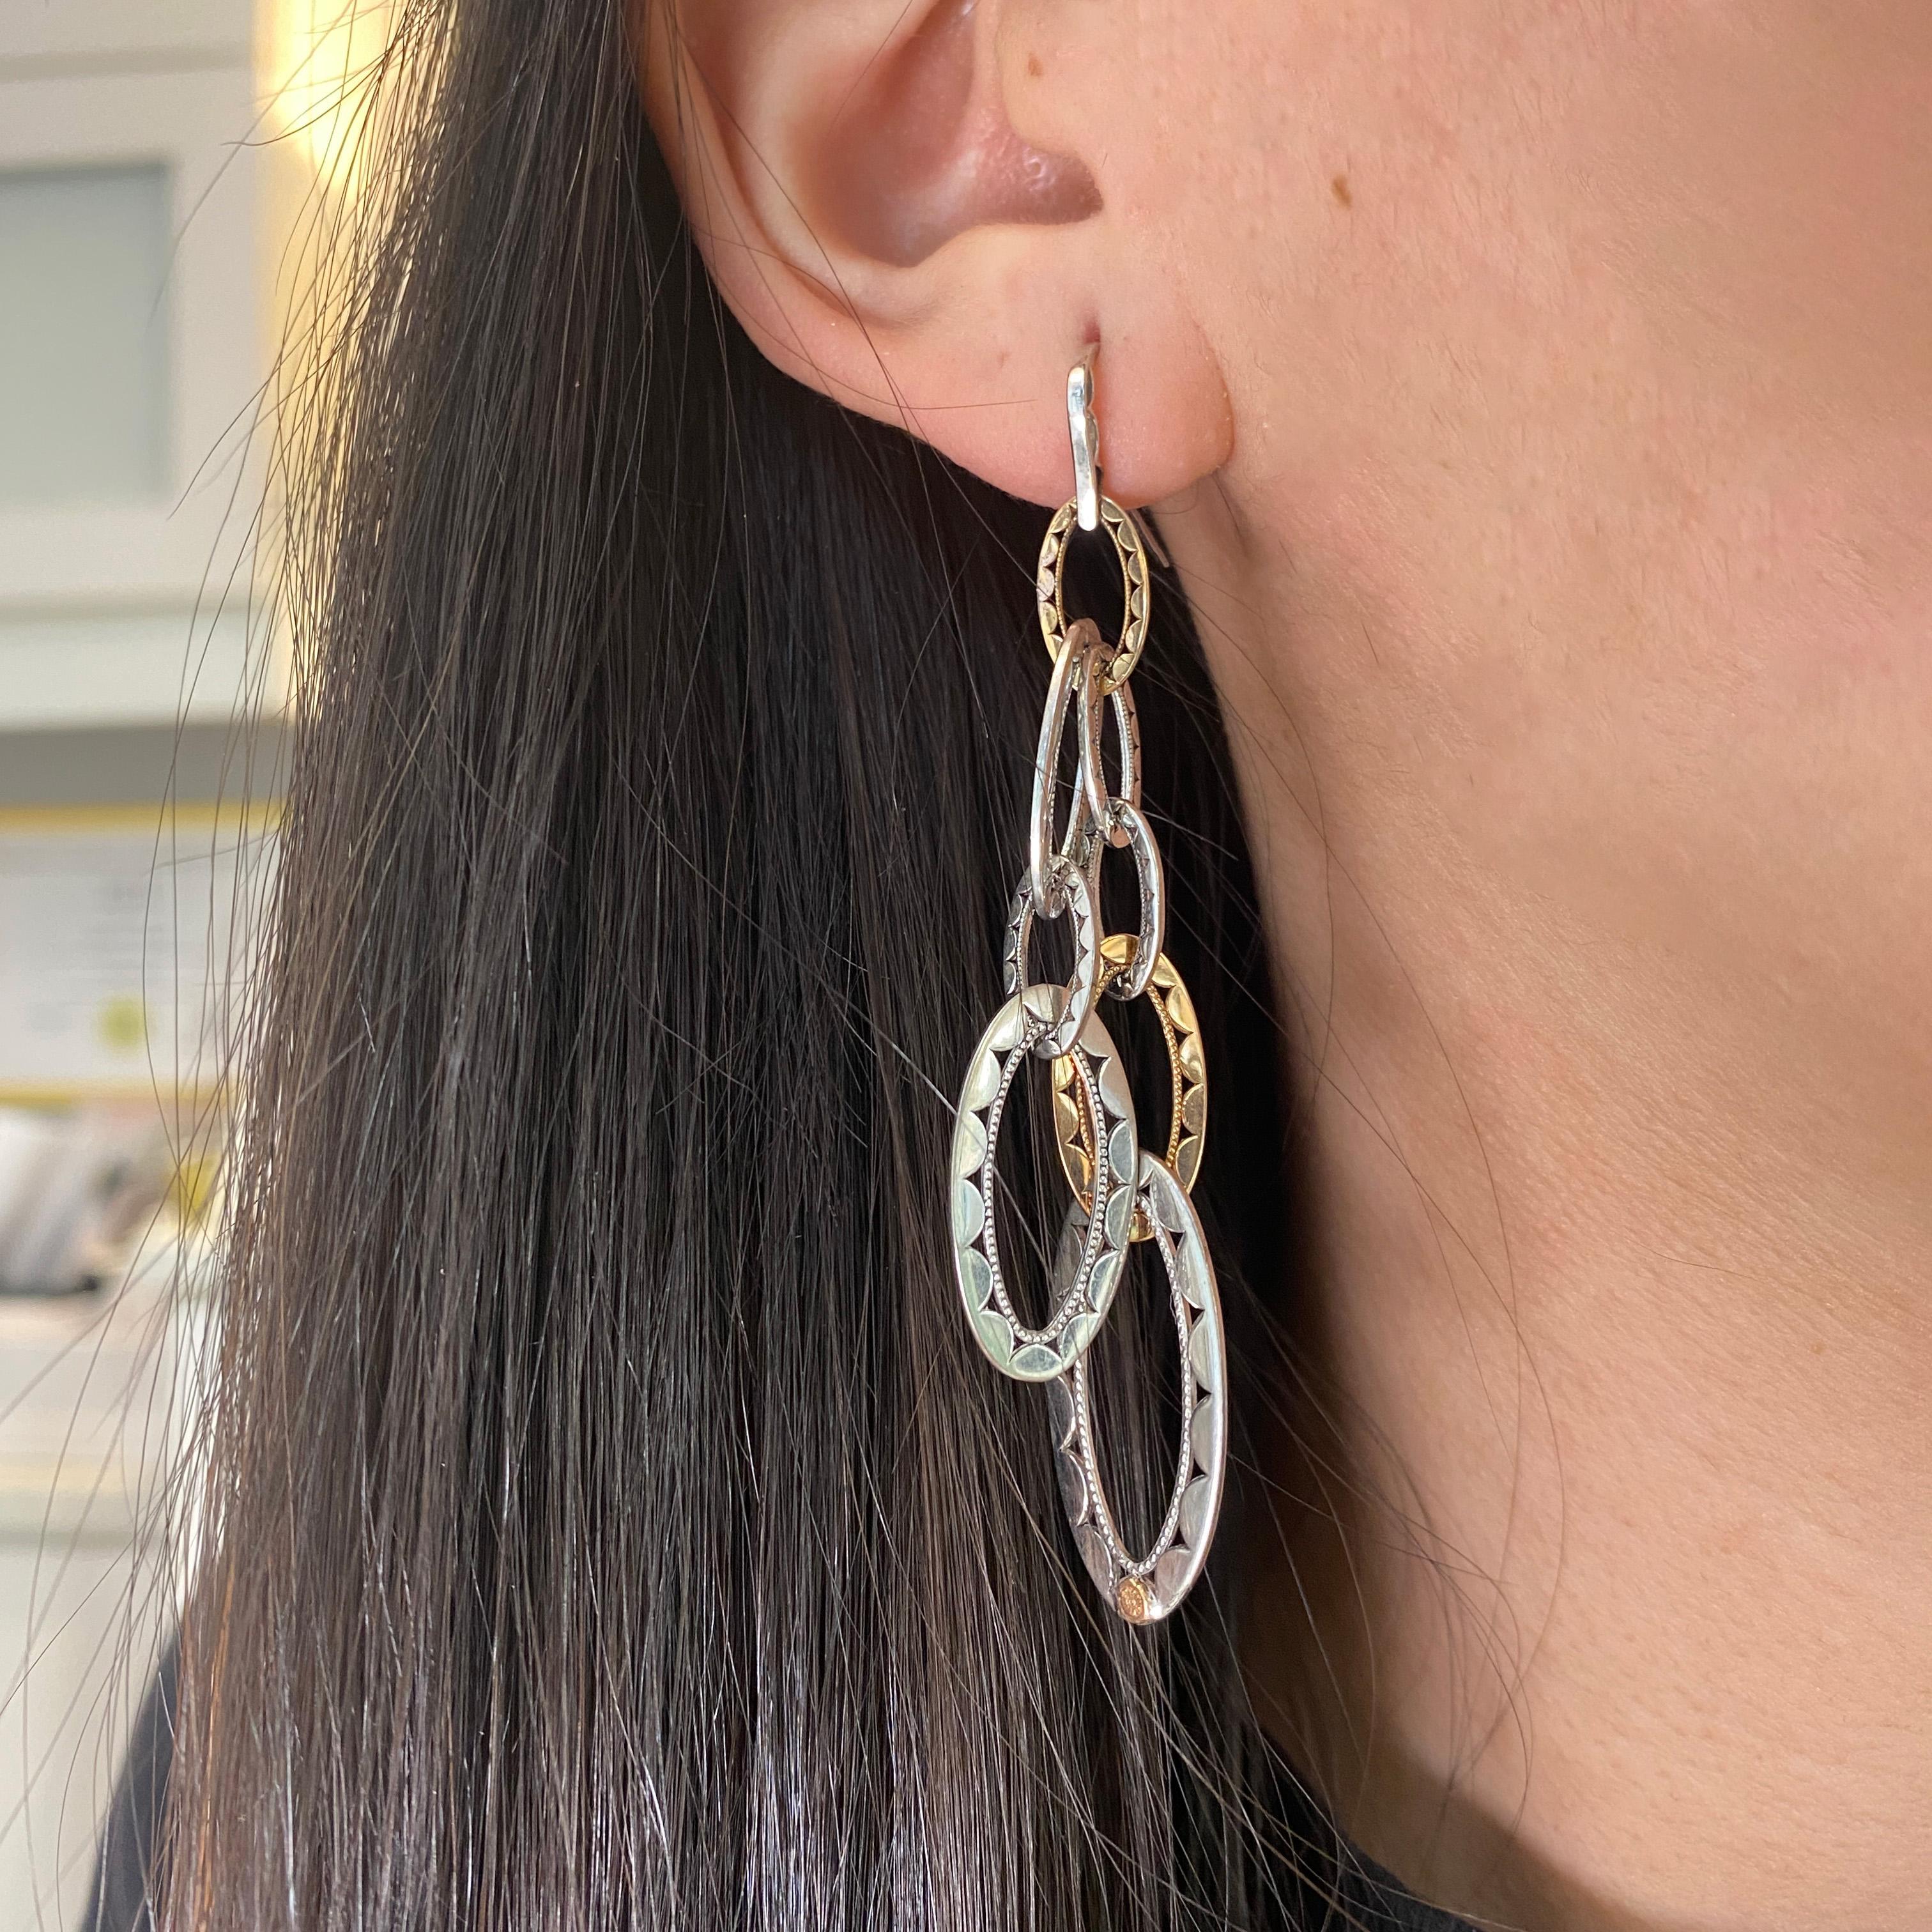 Iconic Tacori crescents accent the inner curves of every oval link in these lovely mixed metal dangles. The beaded edge inner line makes the crescents stand out even more! These mixed metal earrings are perfect for any dressed up or down occasion!